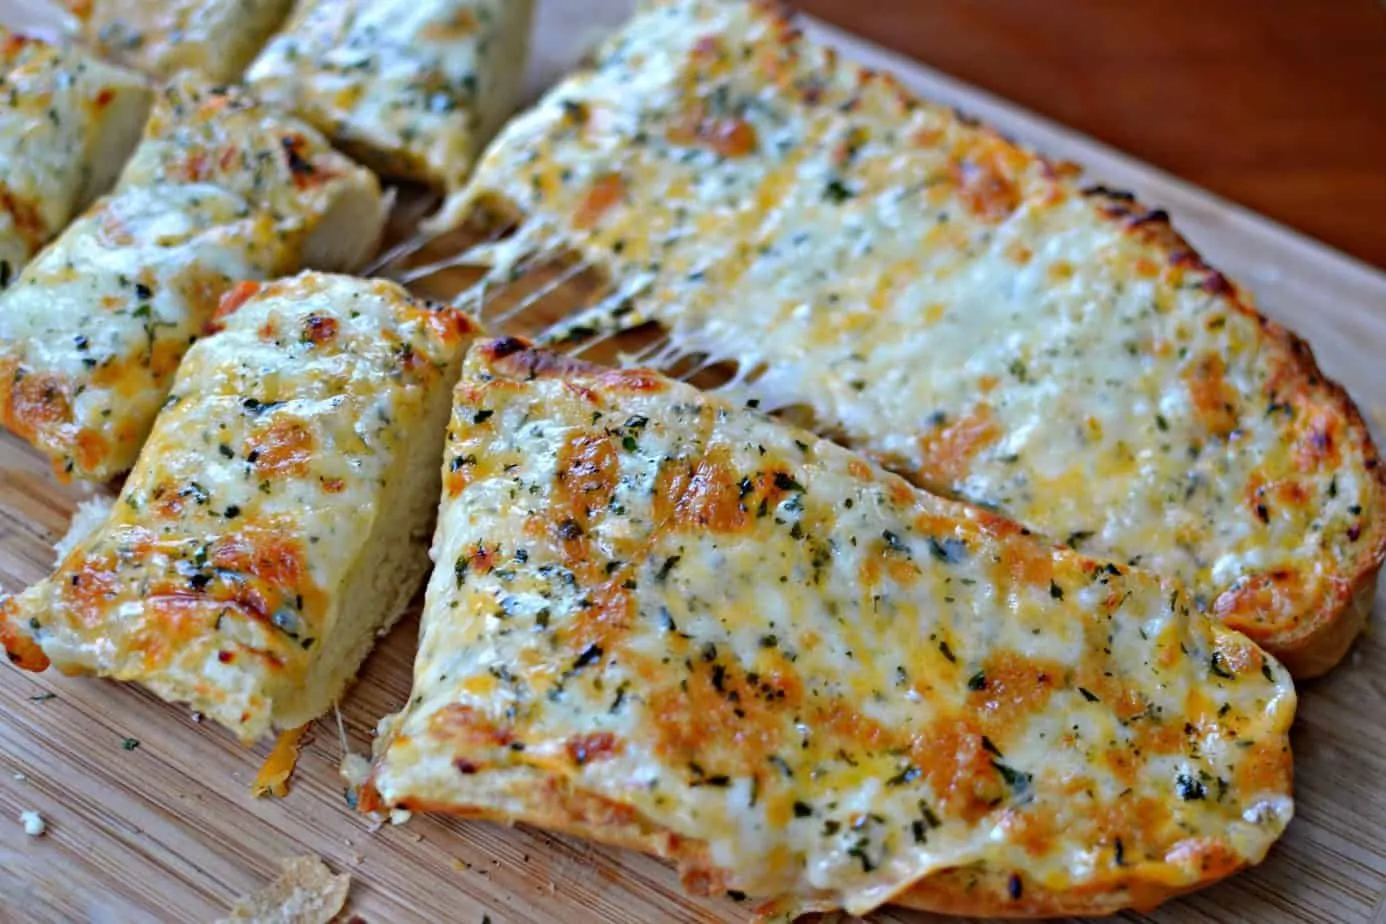 A easy to make loaf of French bread topped with garlic butter, mozzarella, cheddar, provolone and baked to perfection.